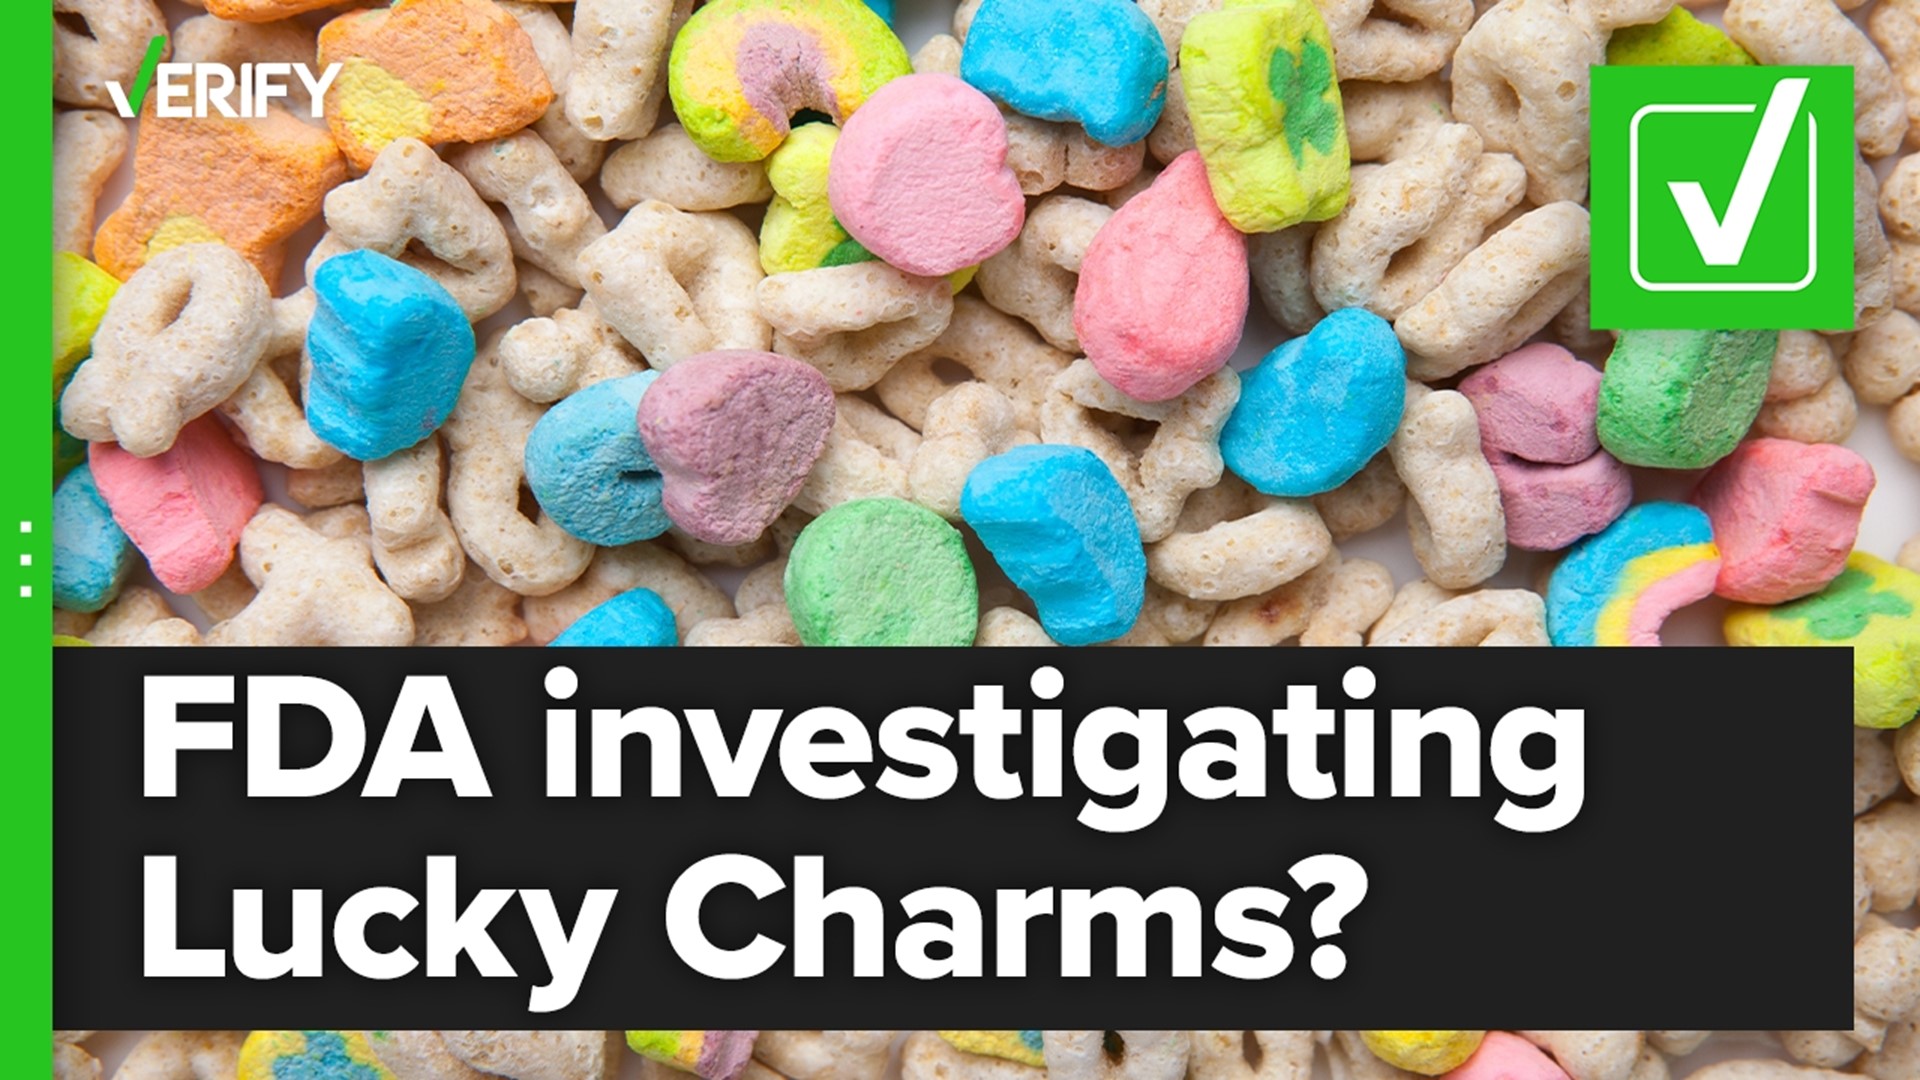 Is the FDA investigating claims that Lucky Charms have caused people to get sick? The VERIFY team confirms this is true.